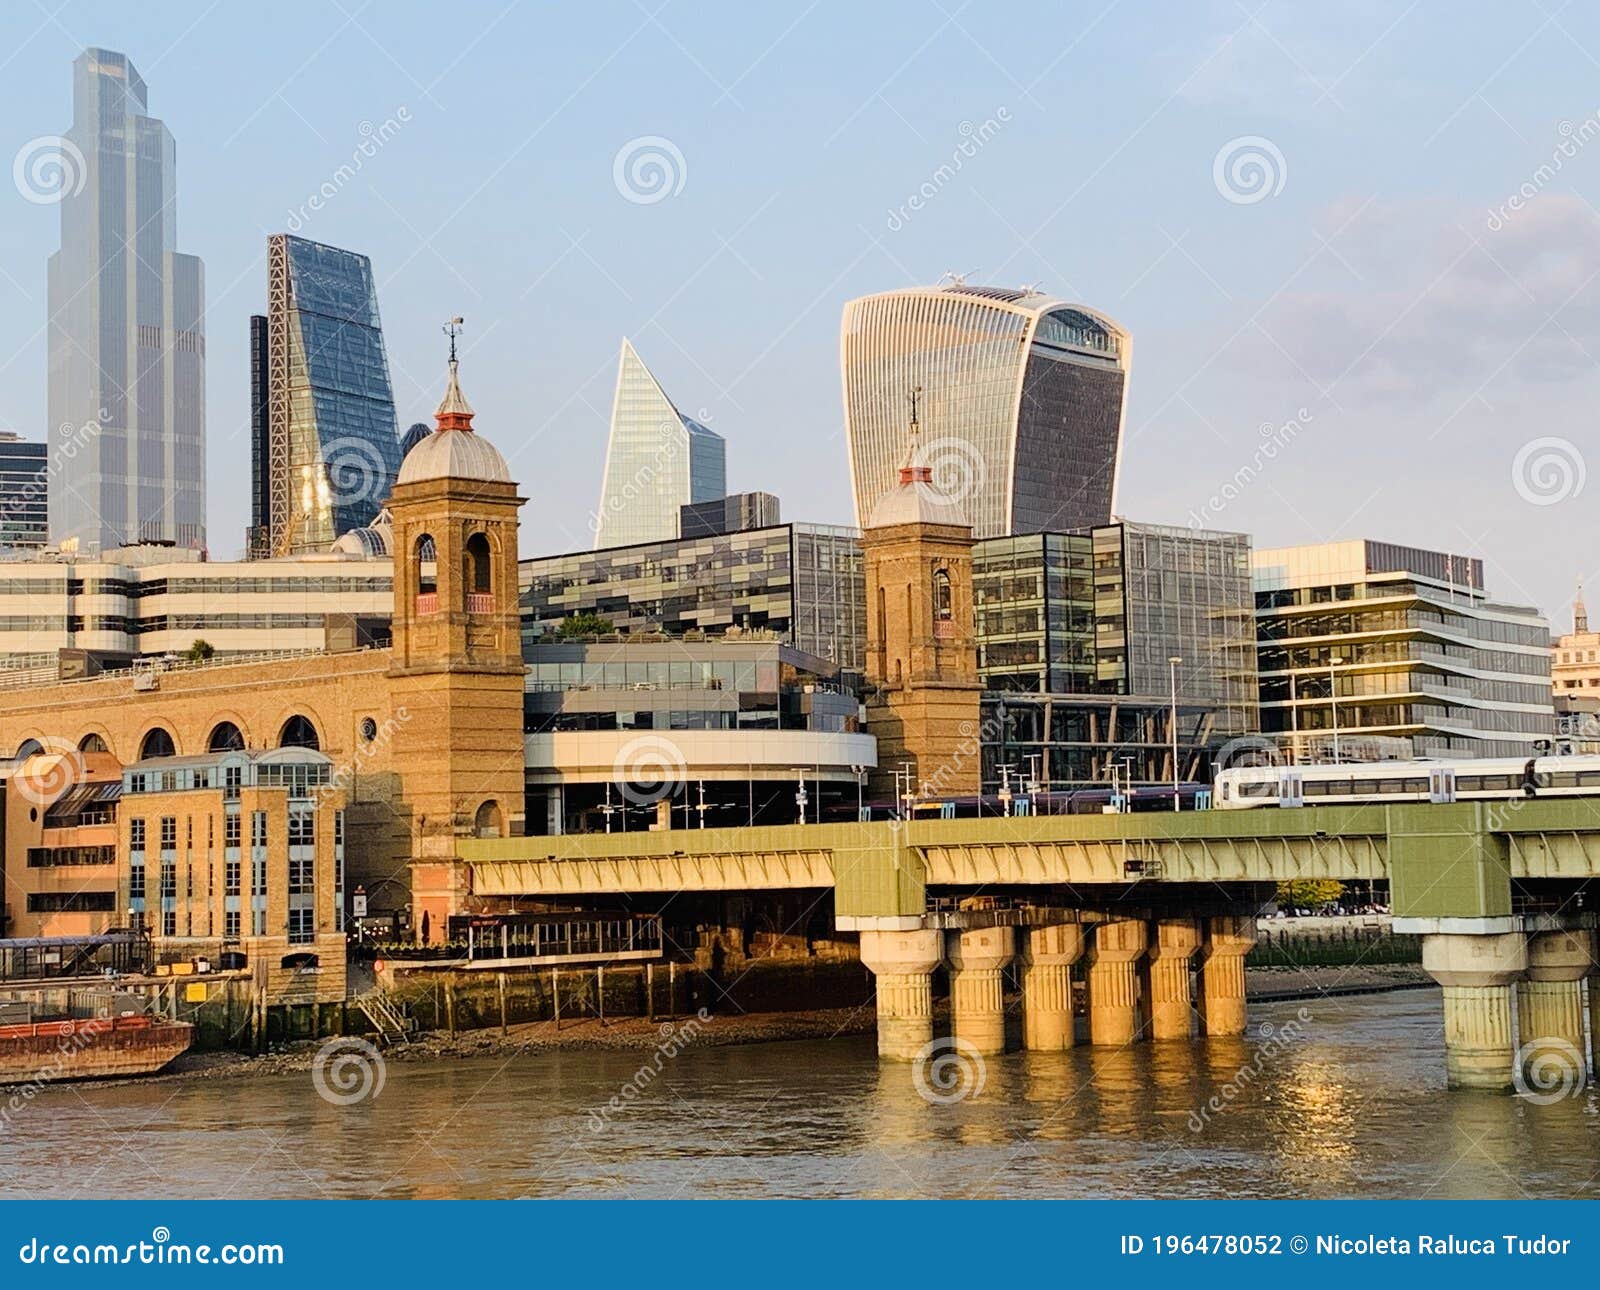 Southwark Area View of London Towers and River Thames in the Capital of ...